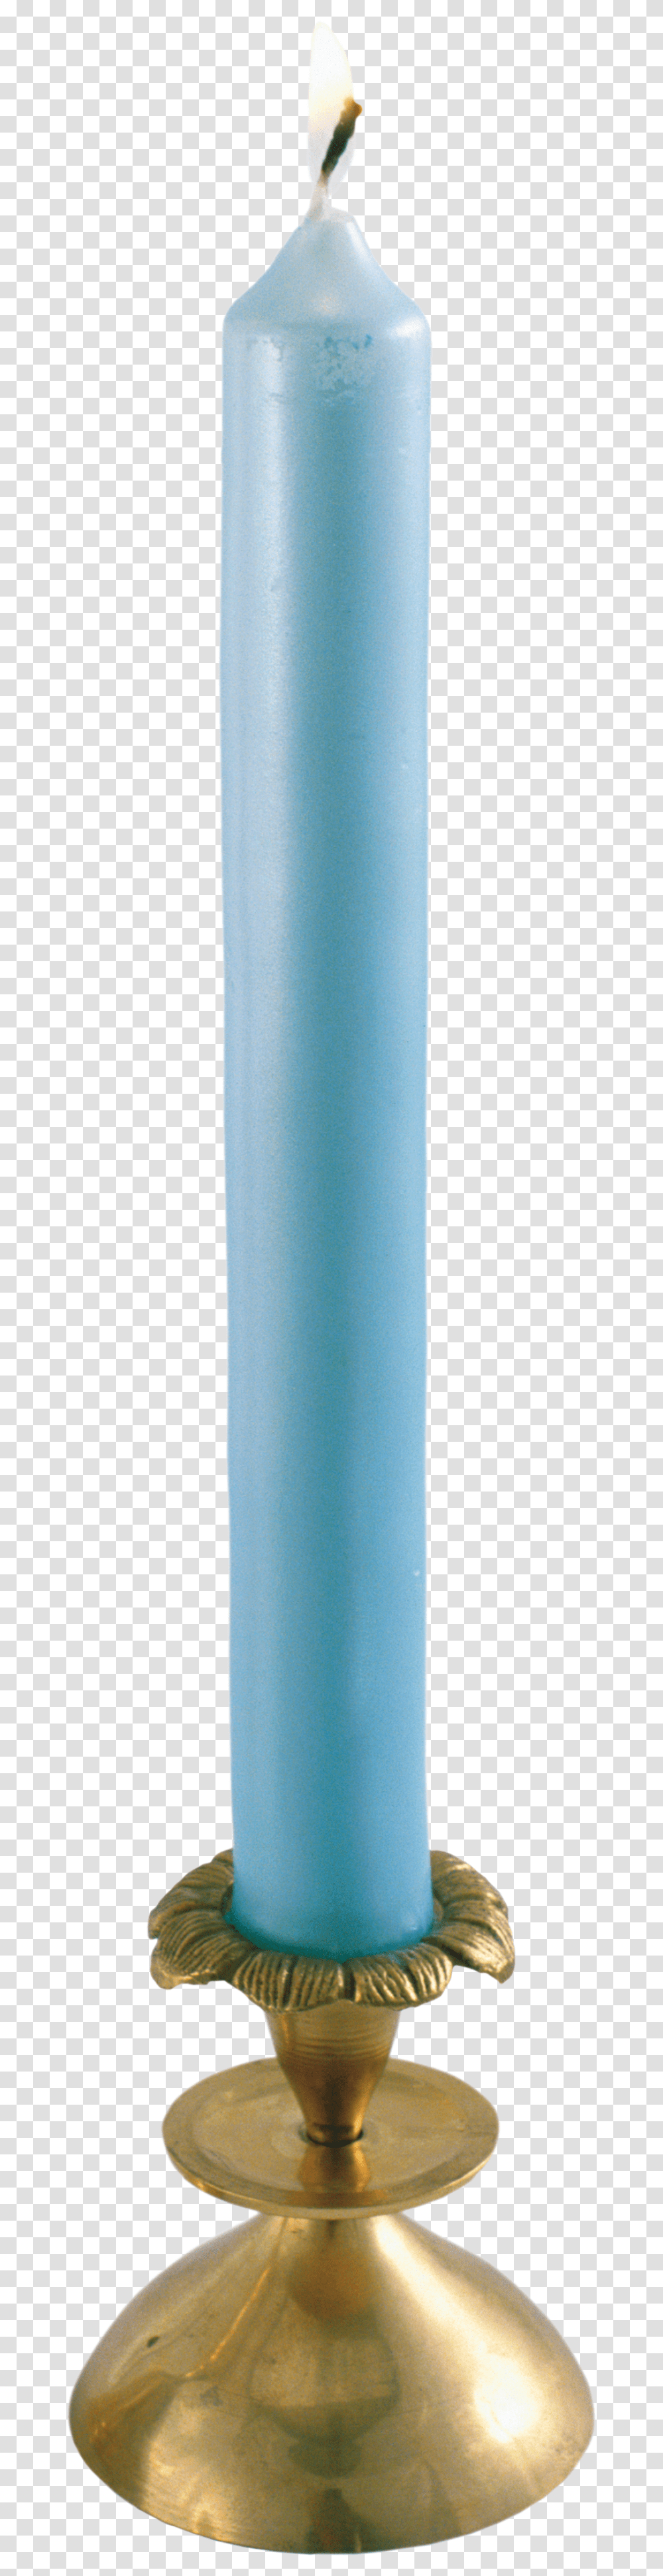 Candle Image Candle, Cylinder, City, Urban, Building Transparent Png